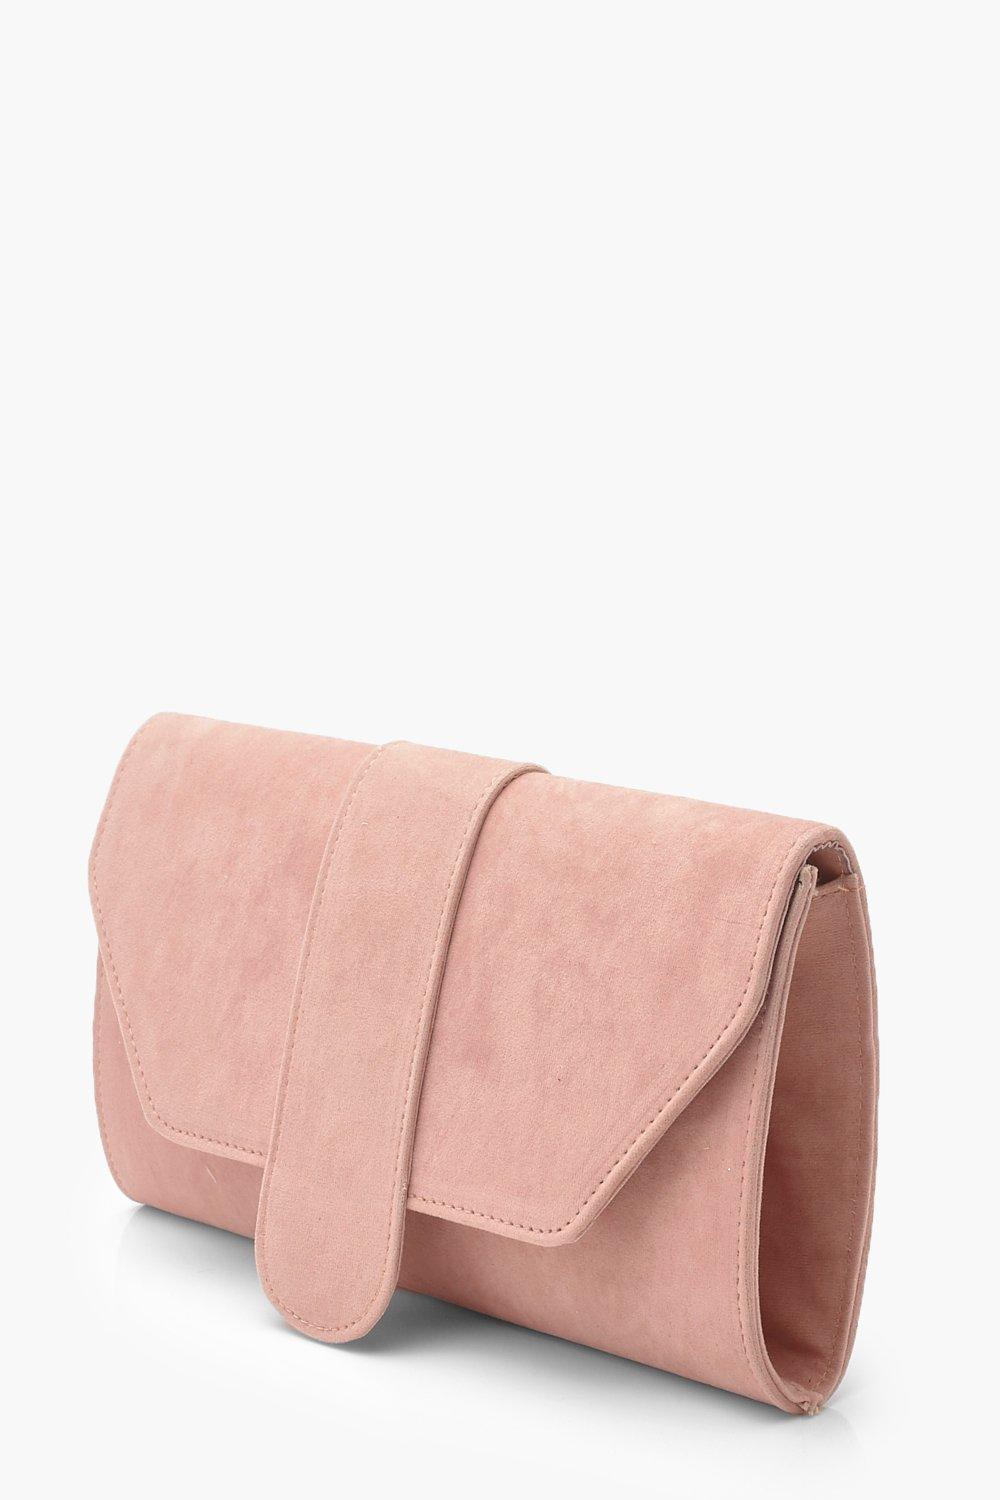 Boohoo Suedette Front Tab Clutch Bag in Pink - Lyst